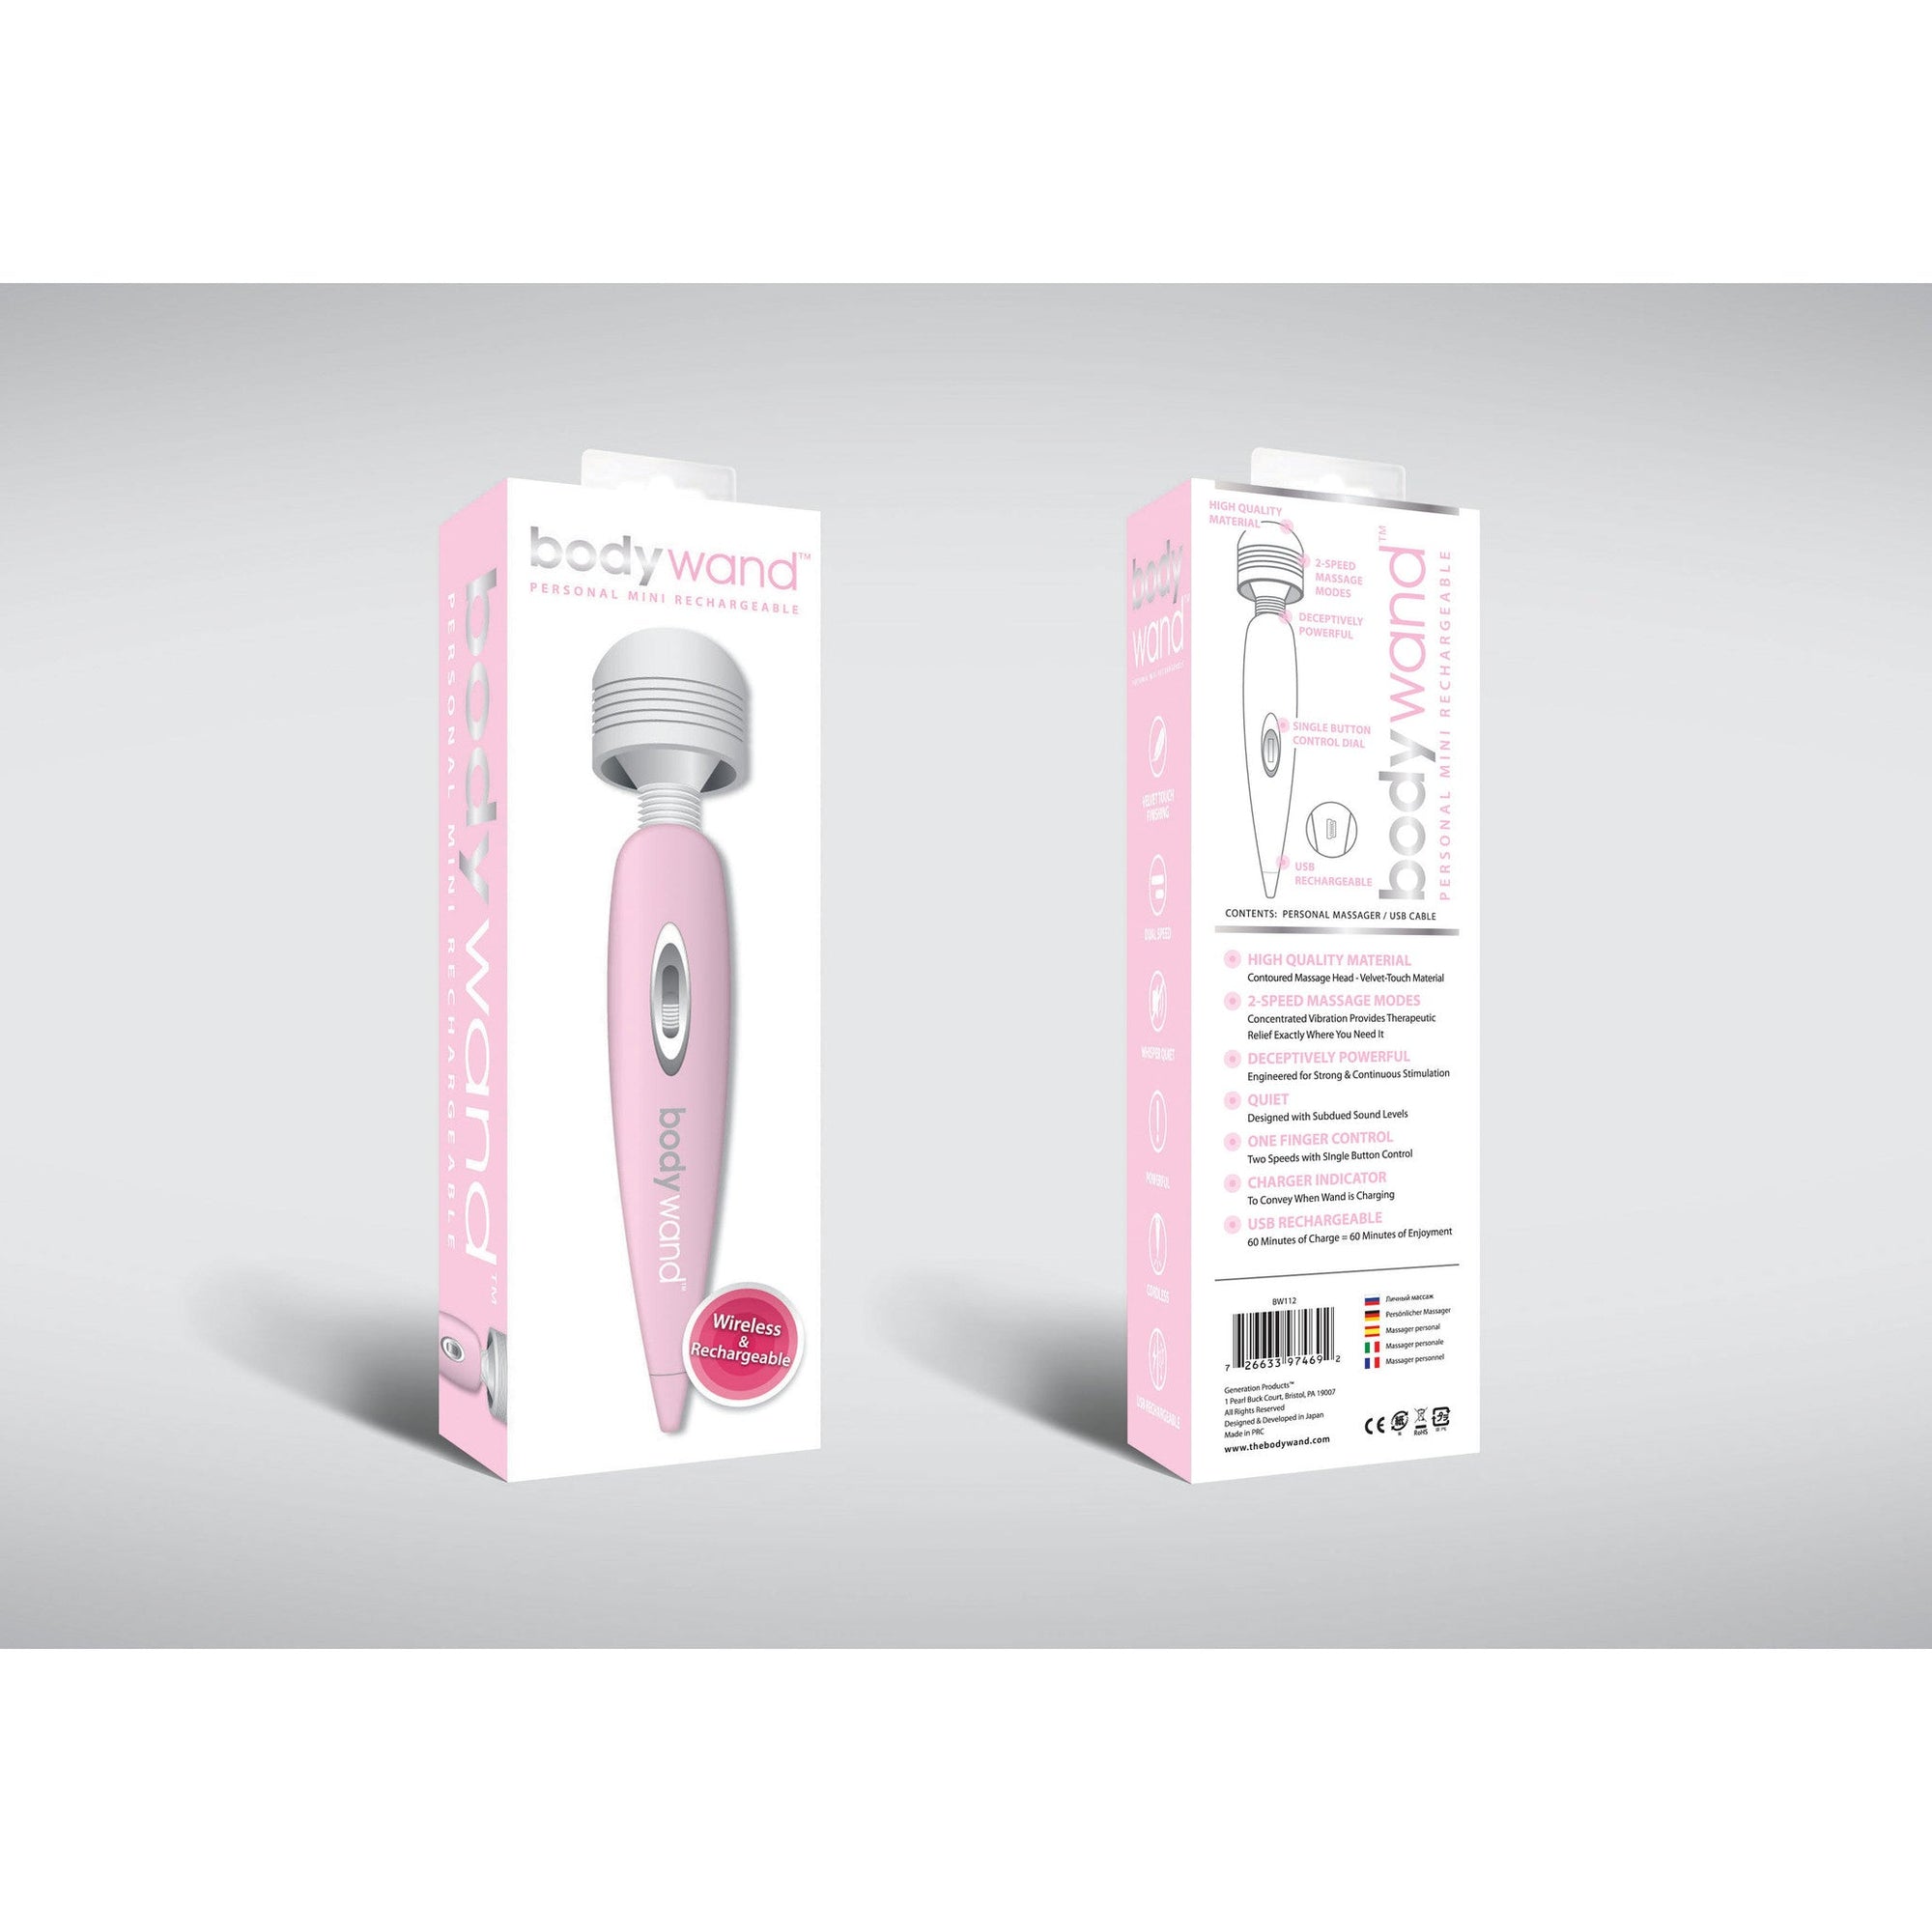 Bodywand - Rechargeable USB Wand Massager (Pink) -  Wand Massagers (Vibration) Rechargeable  Durio.sg